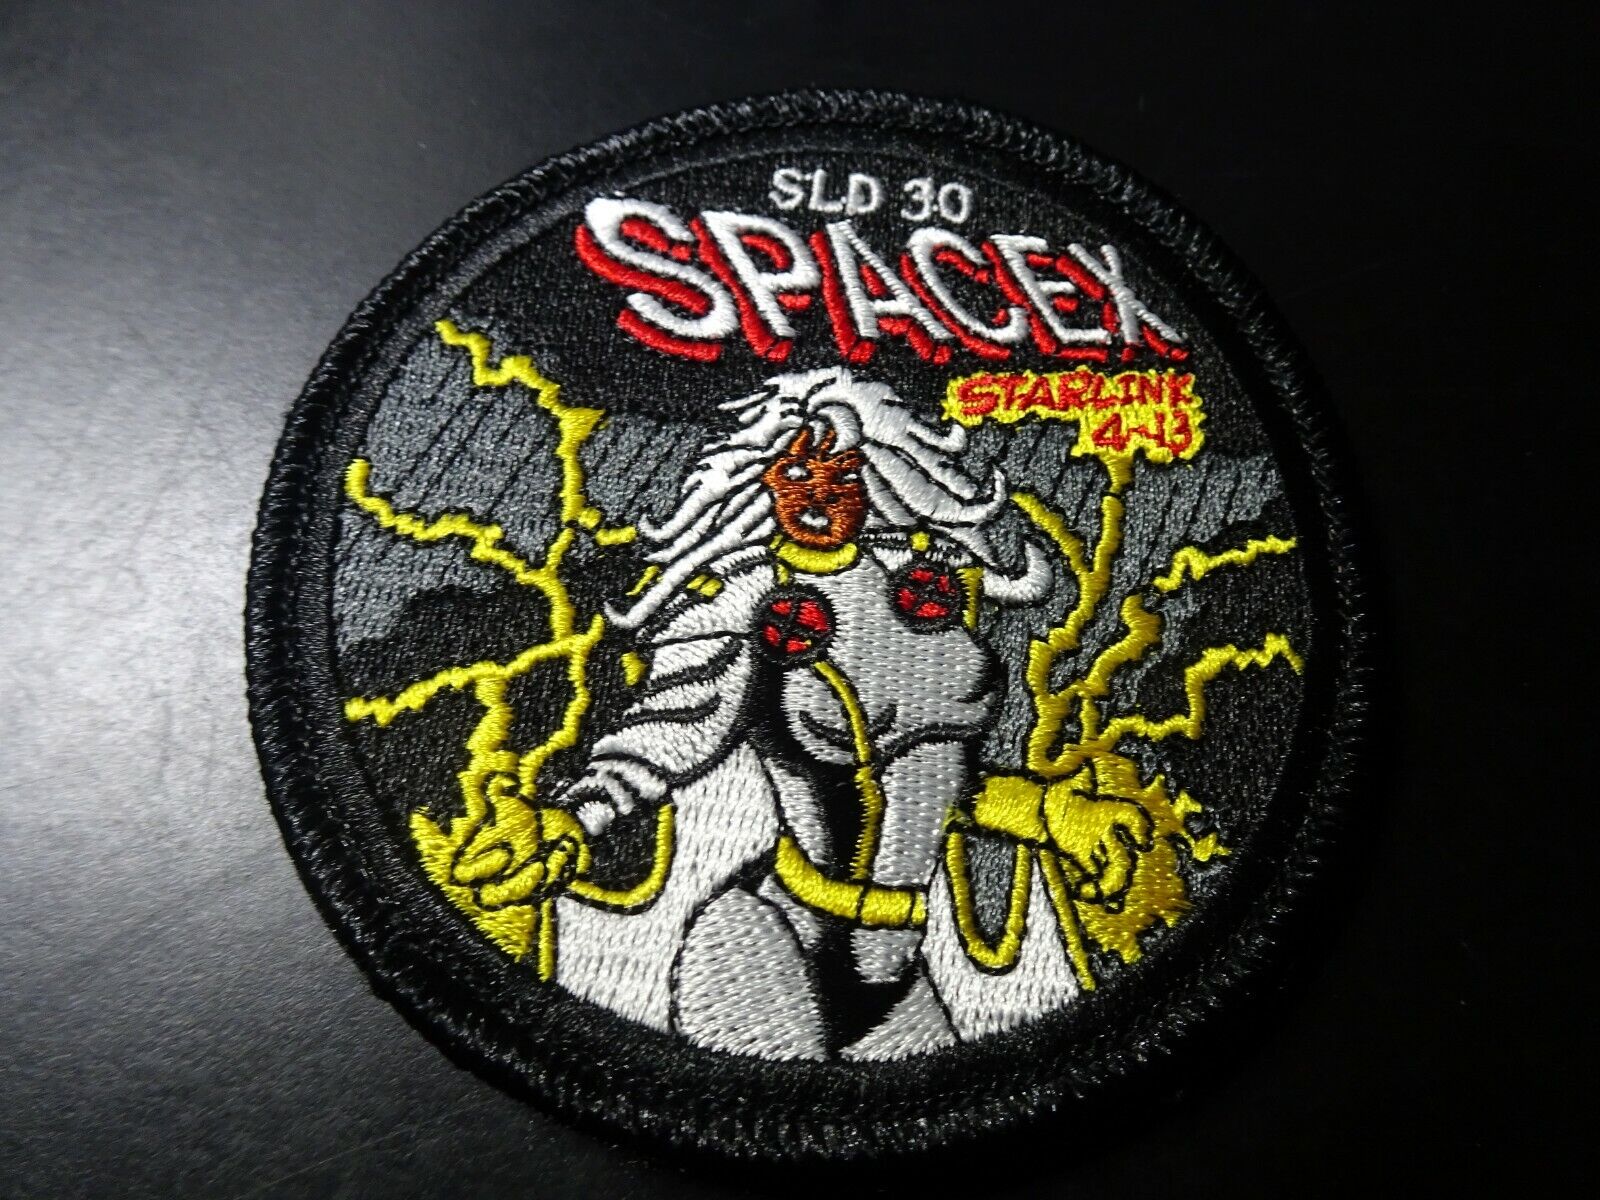 VSFB, Western Range Starlink 4-13 SPACEX SLD-30 Mission Patch